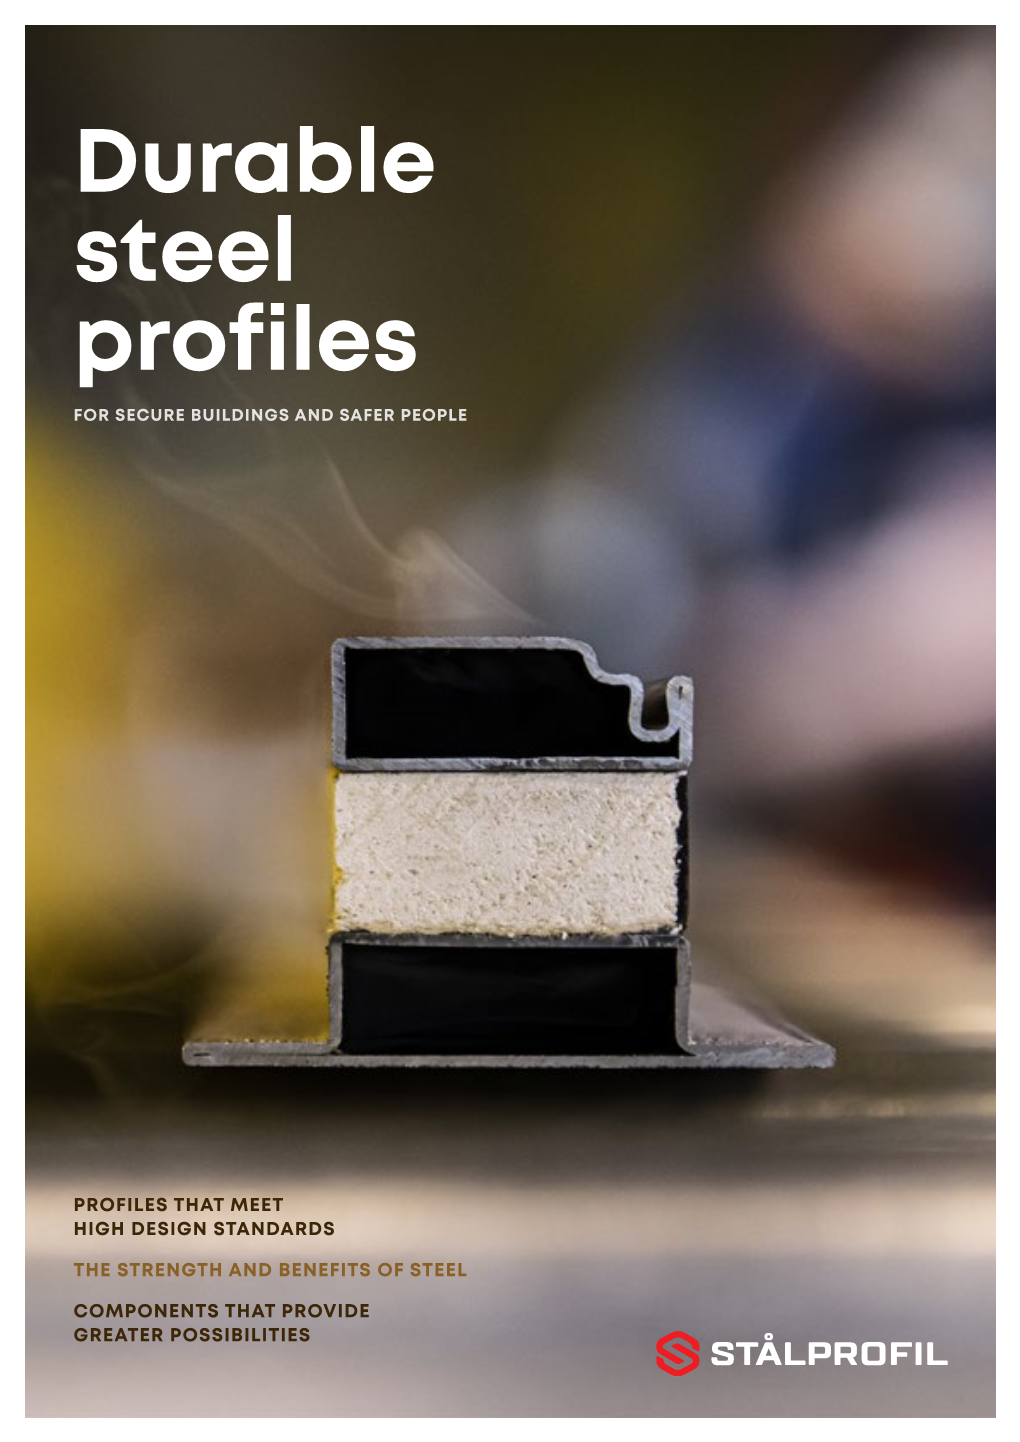 Durable Steel Profiles for SECURE BUILDINGS and SAFER PEOPLE